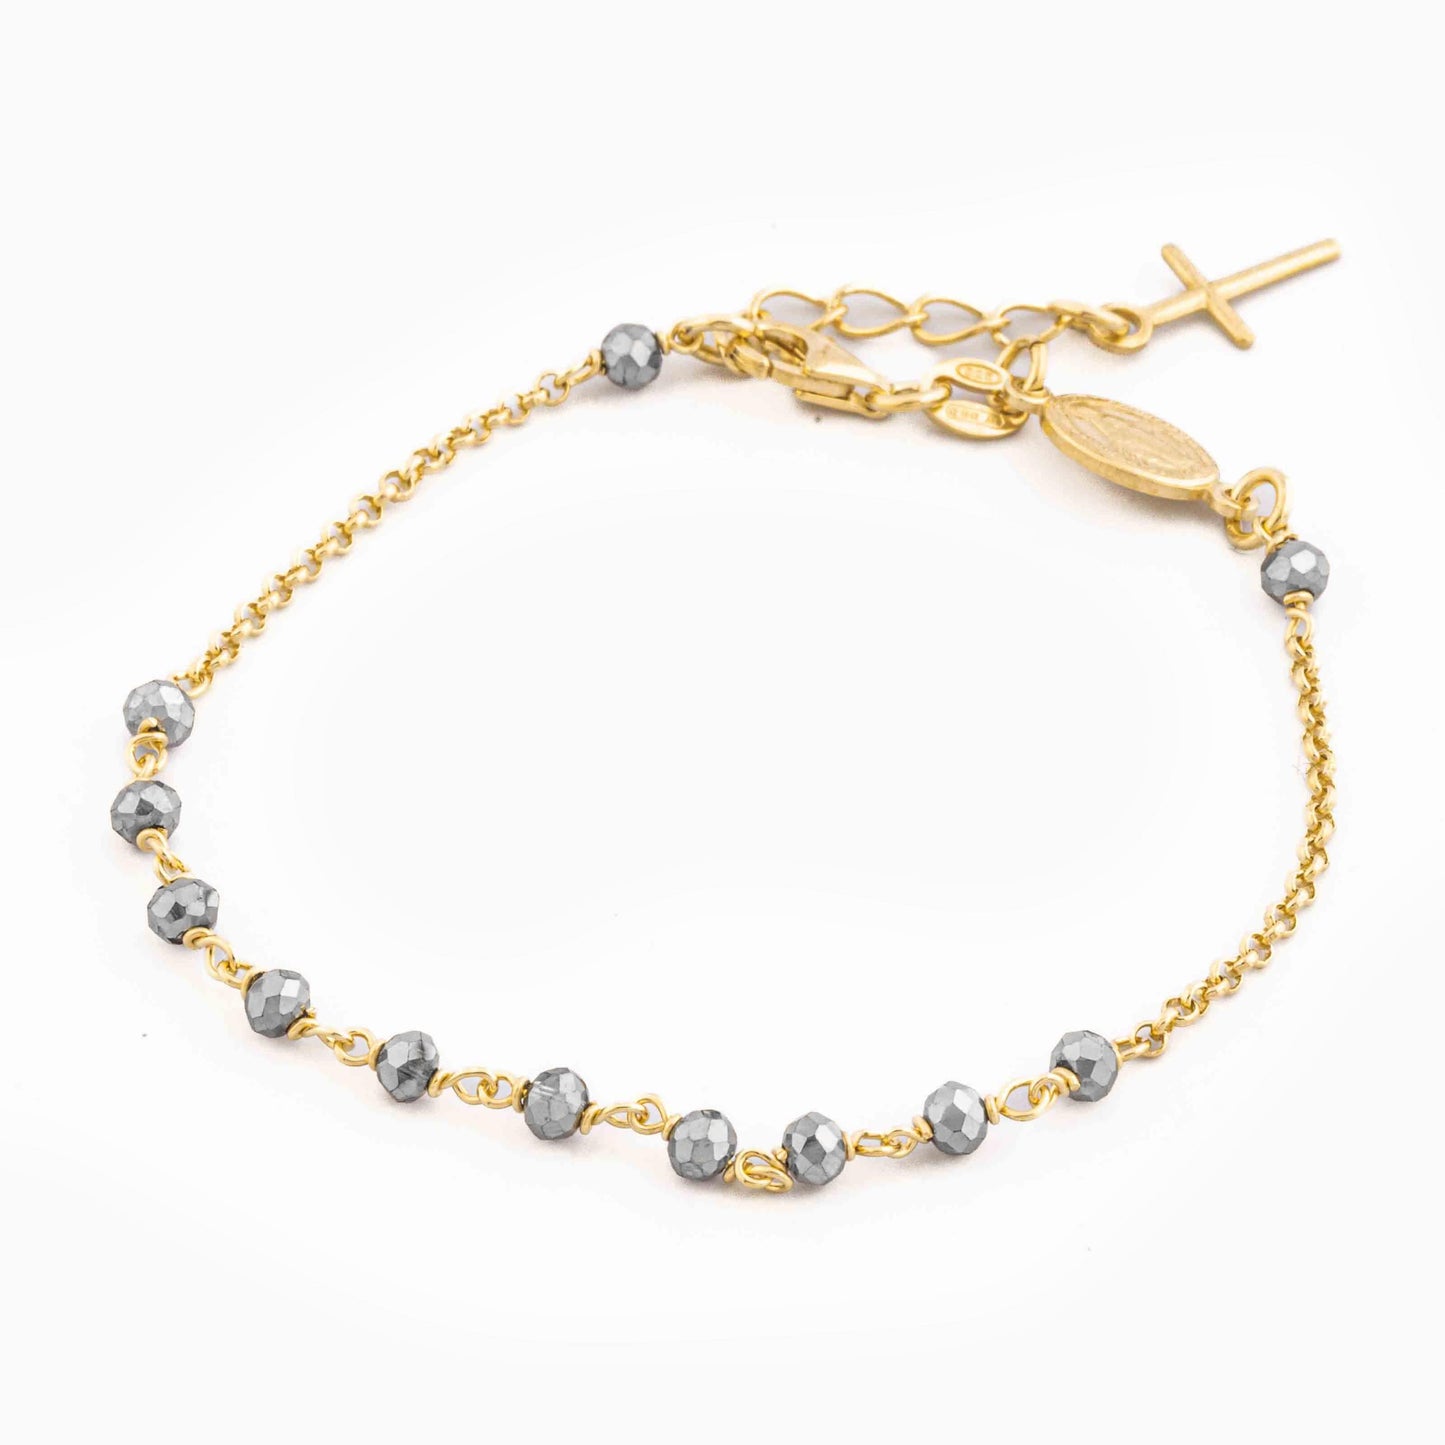 MONDO CATTOLICO Prayer Beads Gold and Grey / Cm 17.5 (6.9 in) STERLING SILVER ROSARY BRACELET WITH MIRACULOUS MEDAL AND CROSS FACETED BEADS